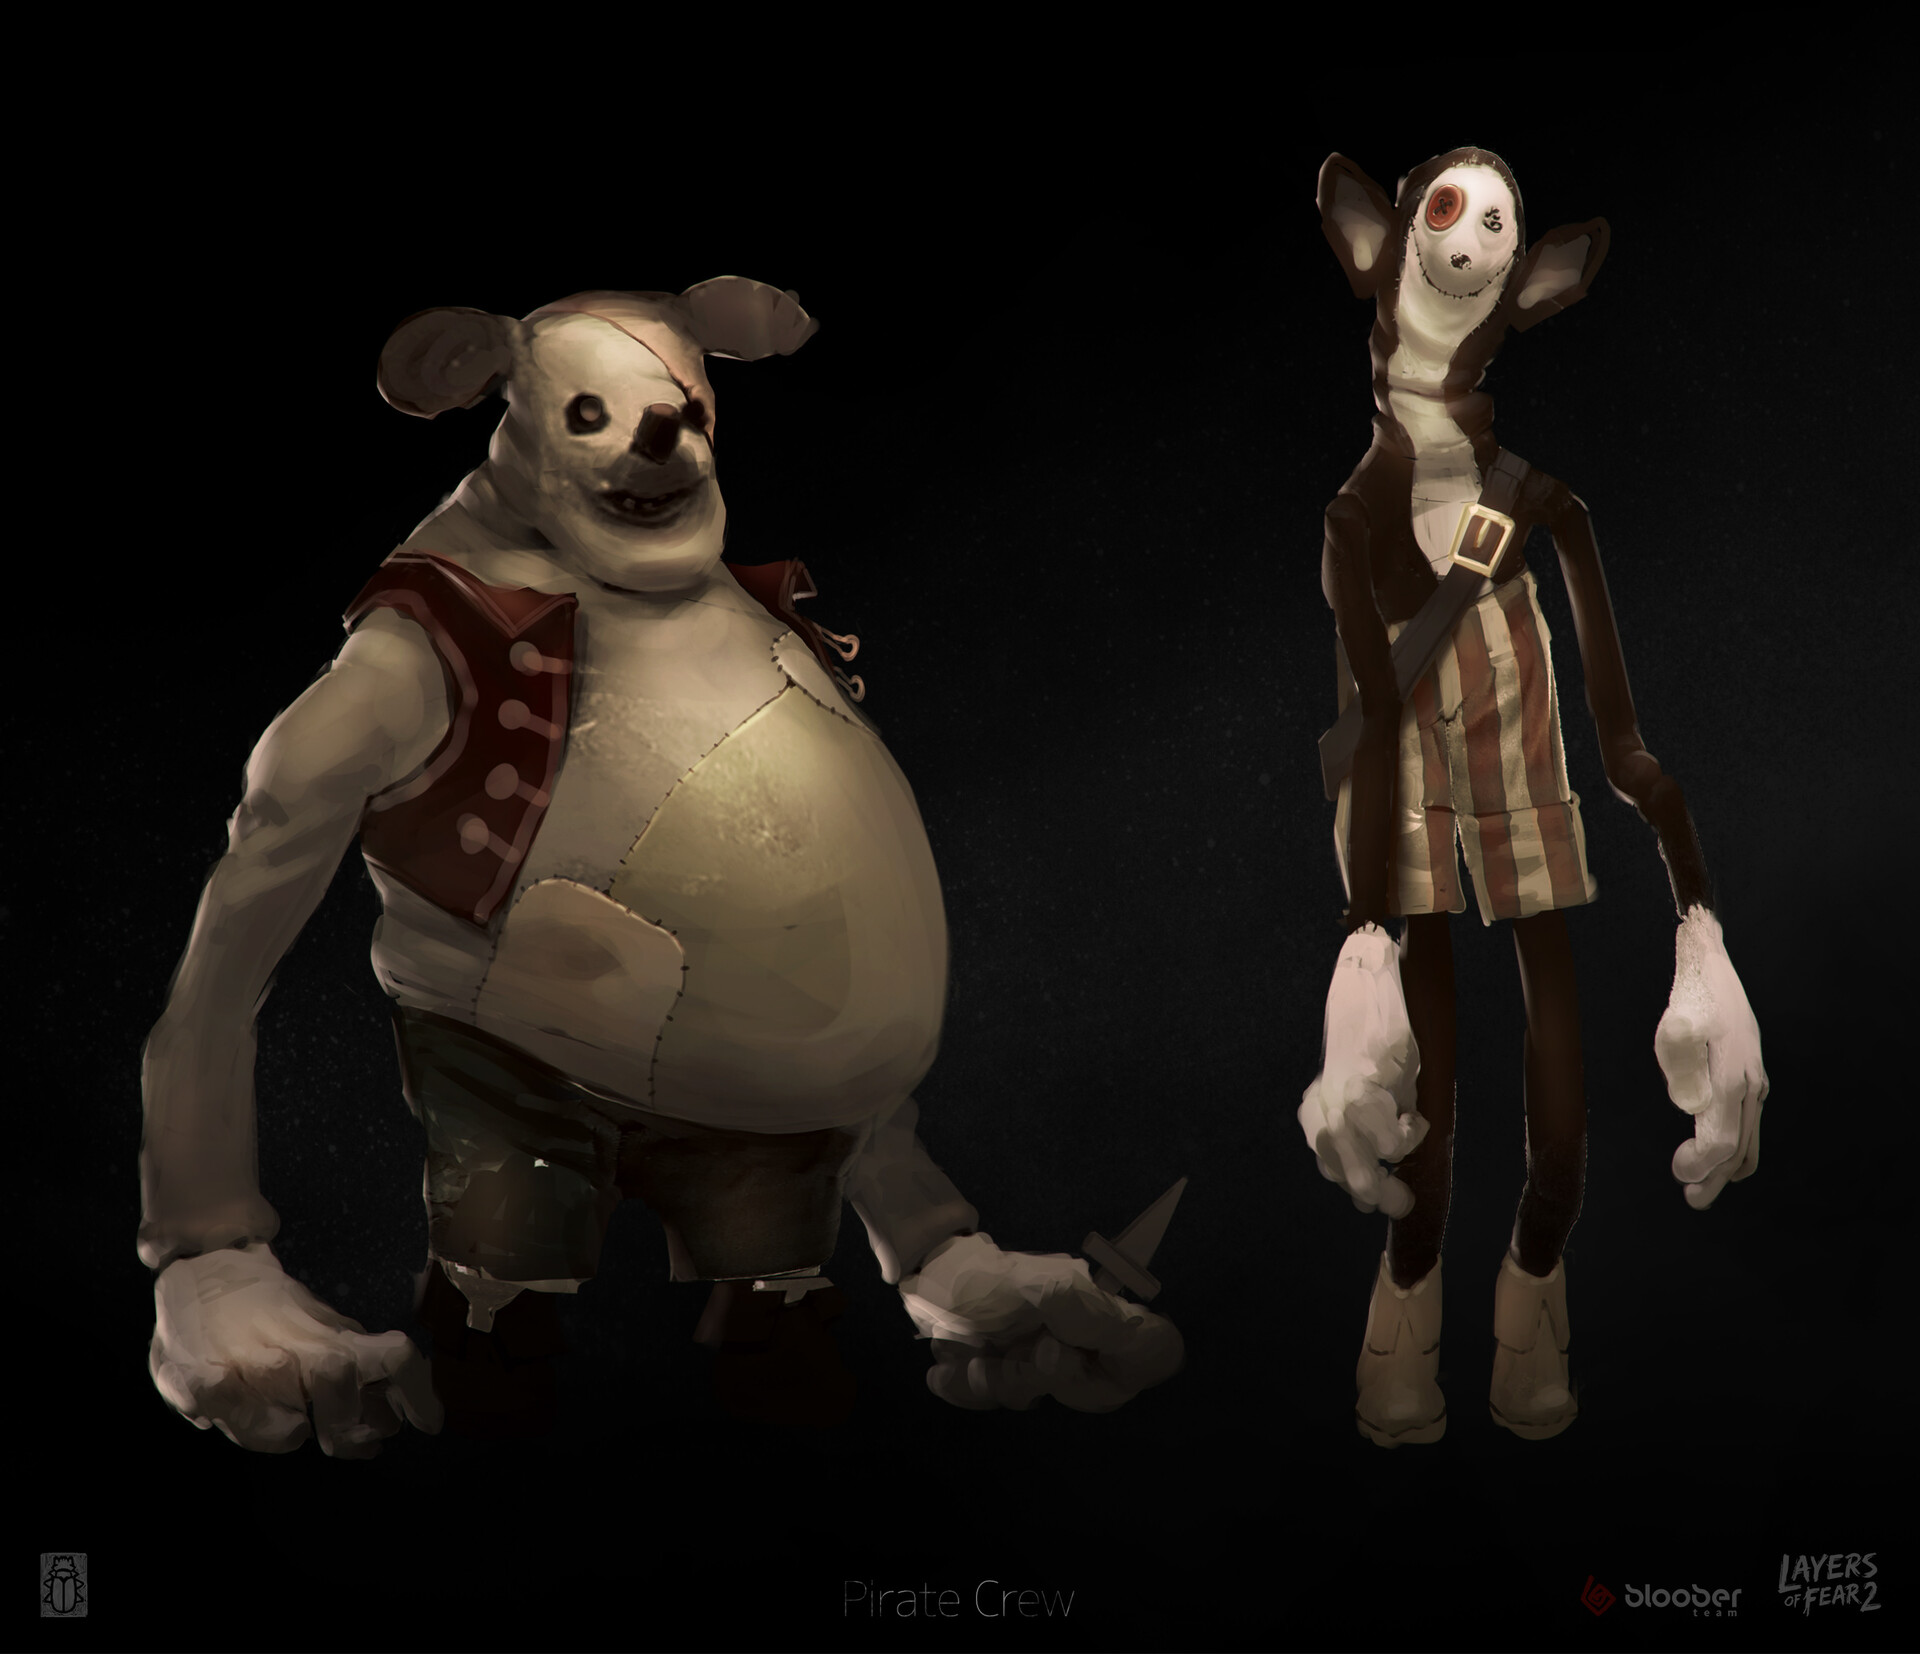 Hassler — Concept art for Layers of Fear 2 (unused design